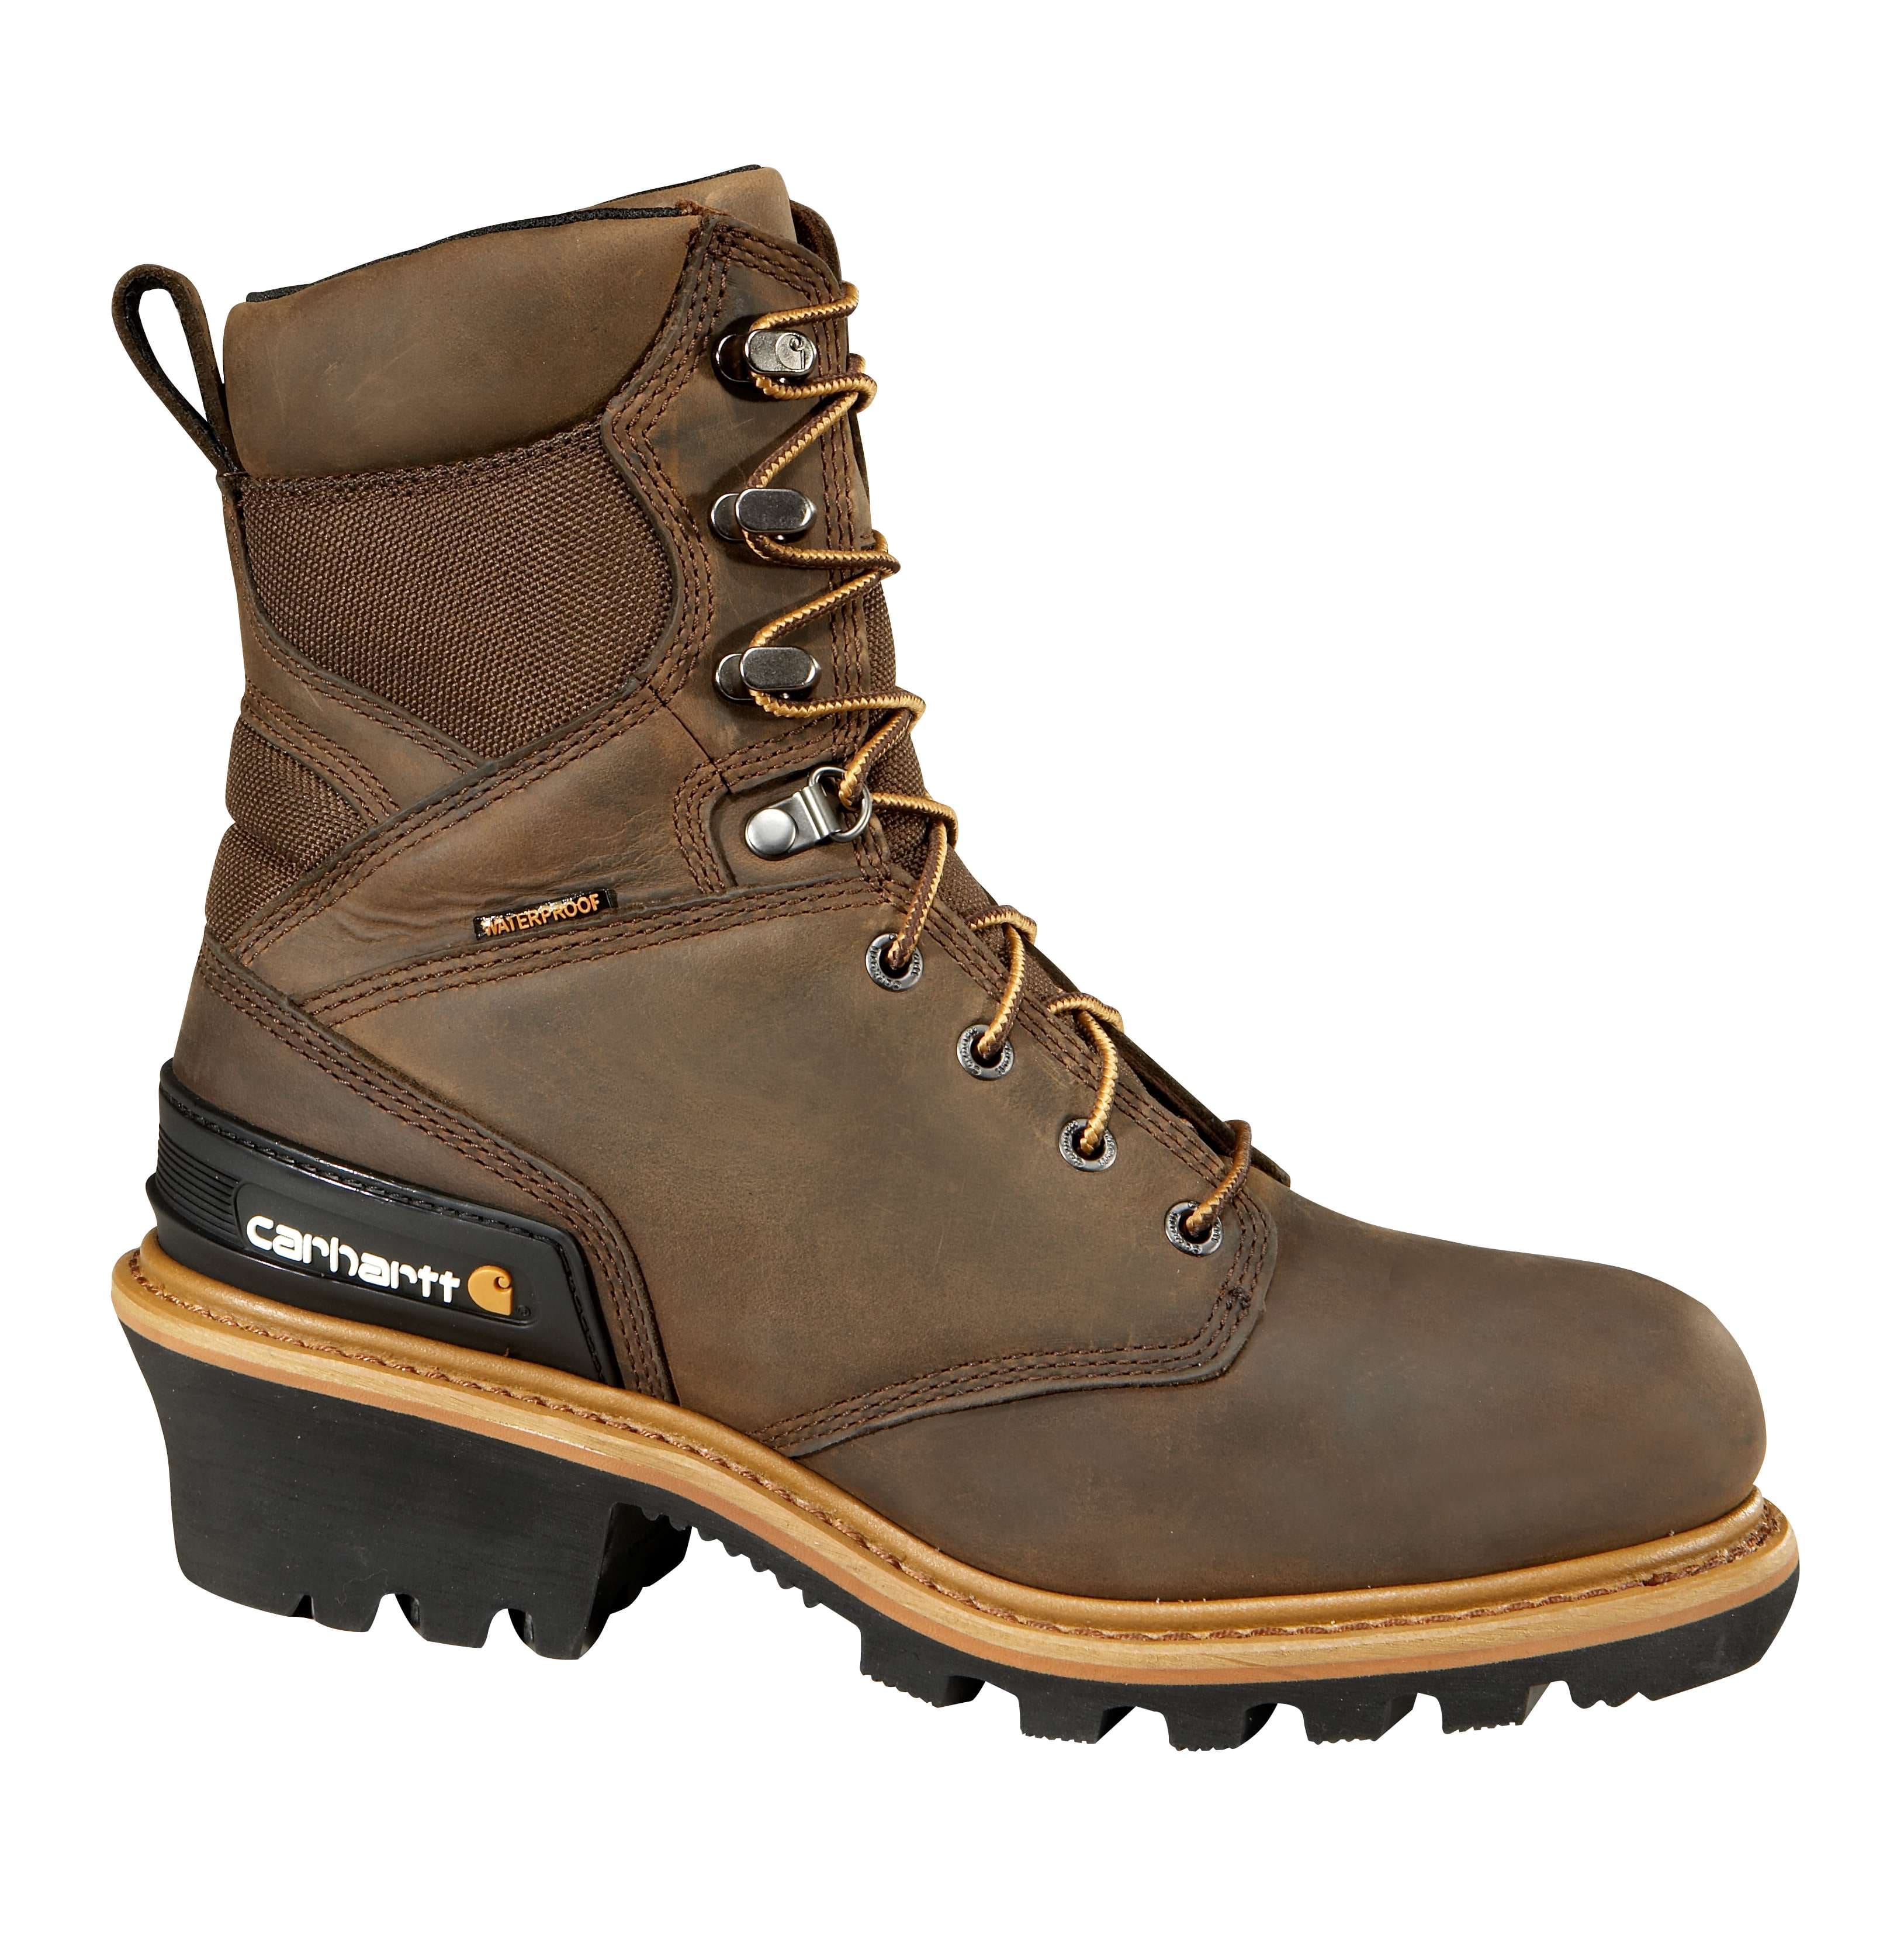 Waterproof Insulated 8" Composite Toe Logger Boot